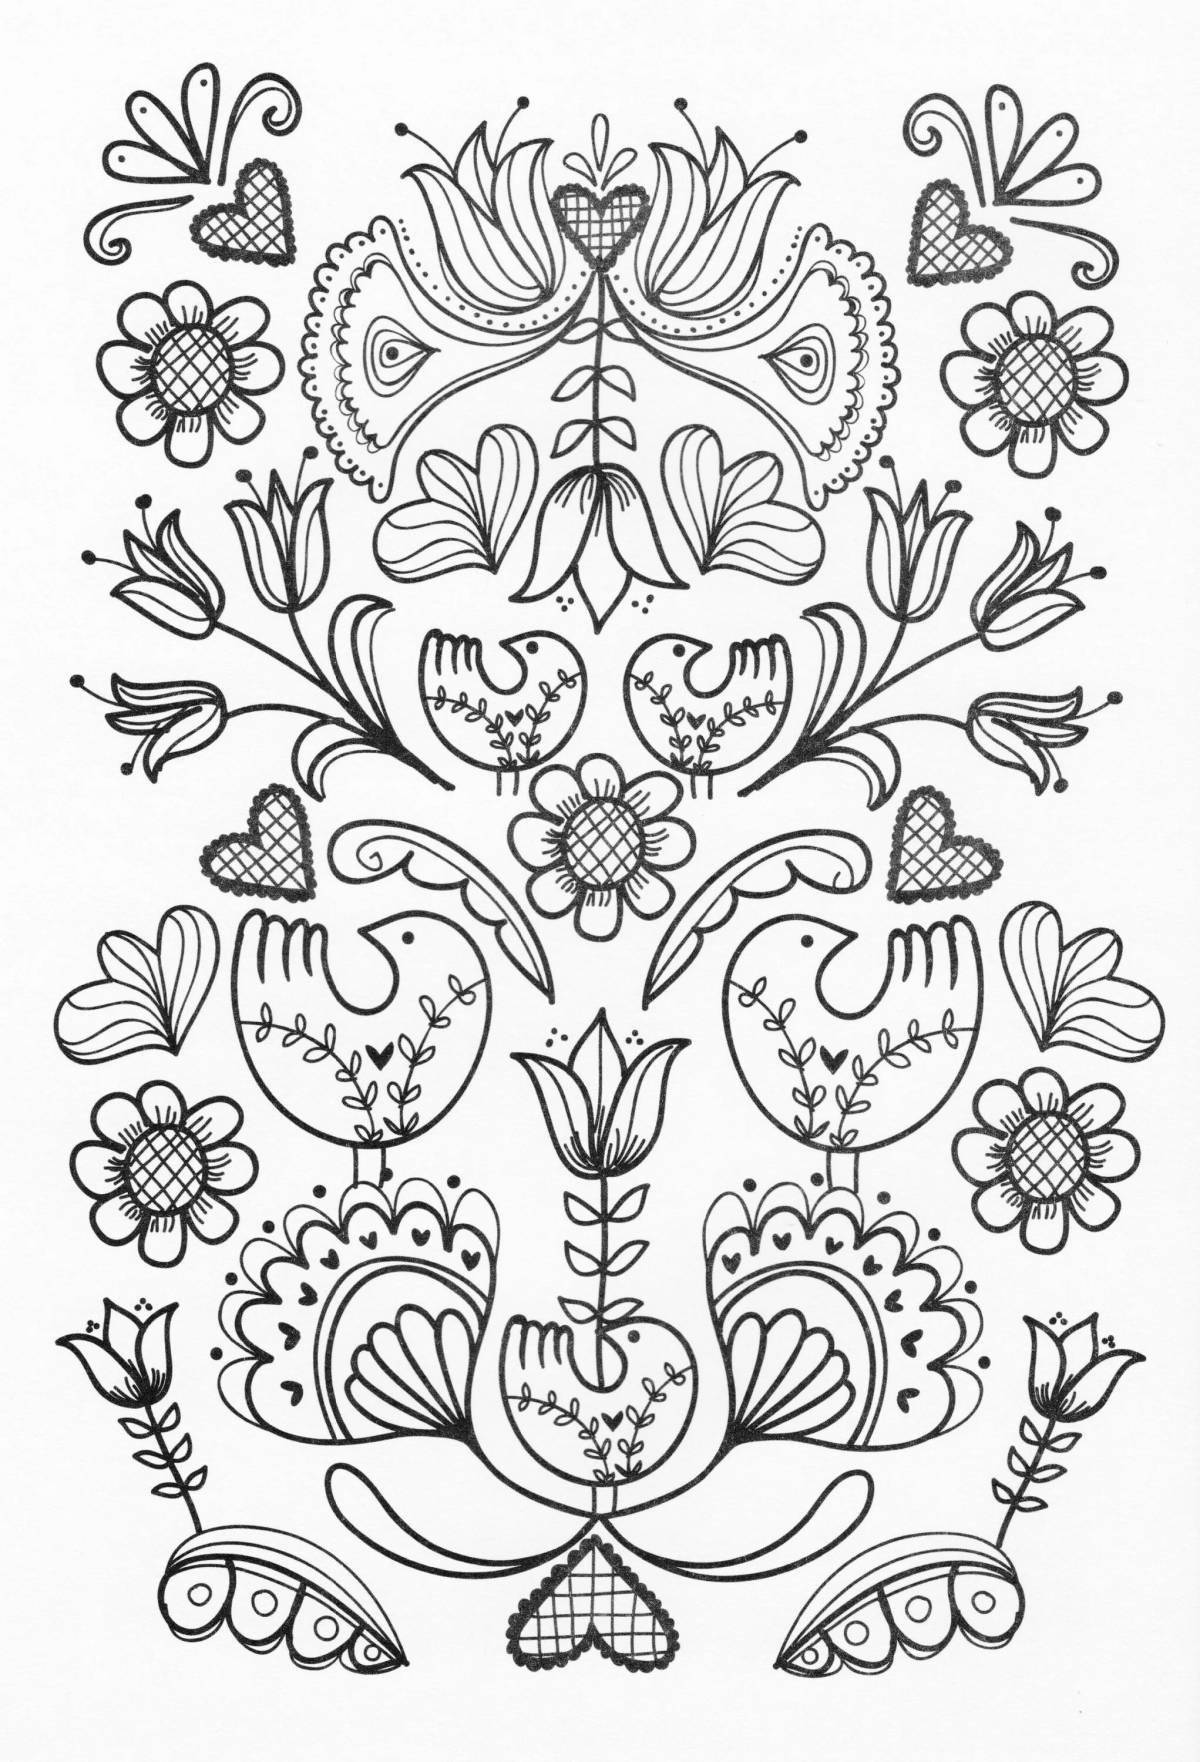 Coloring book intricate Russian pattern